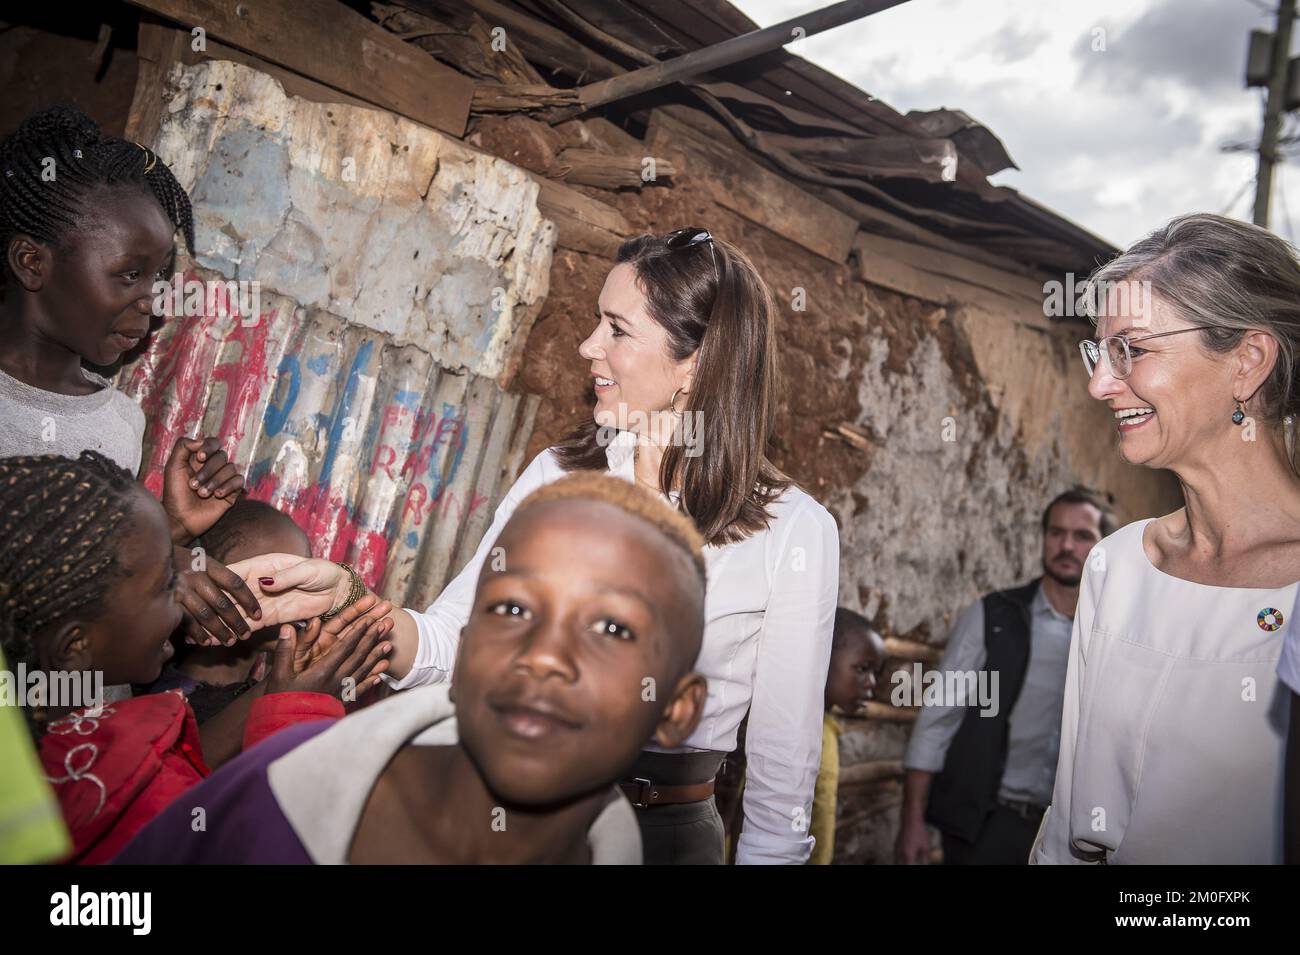 On November 27th and 28th 2018 HRH Crown Princess Mary visited Kenya along with the Minister for Development Ulla Tørnæs. On the second day of the visit the Crown Princess and Minister participated in the launch of the Deliver for Good campaign by Women Deliver and the Danish Ministry for Development at the Radisson Blu Hotel in Nairobi. The campaign focuses on equality and bettering the chances for women and girls in Kenya. They also visited the Kibera Slum where grassroots organization Action Foundation support children, young people and mothers with handicaps to a better life. Lastly they m Stock Photo